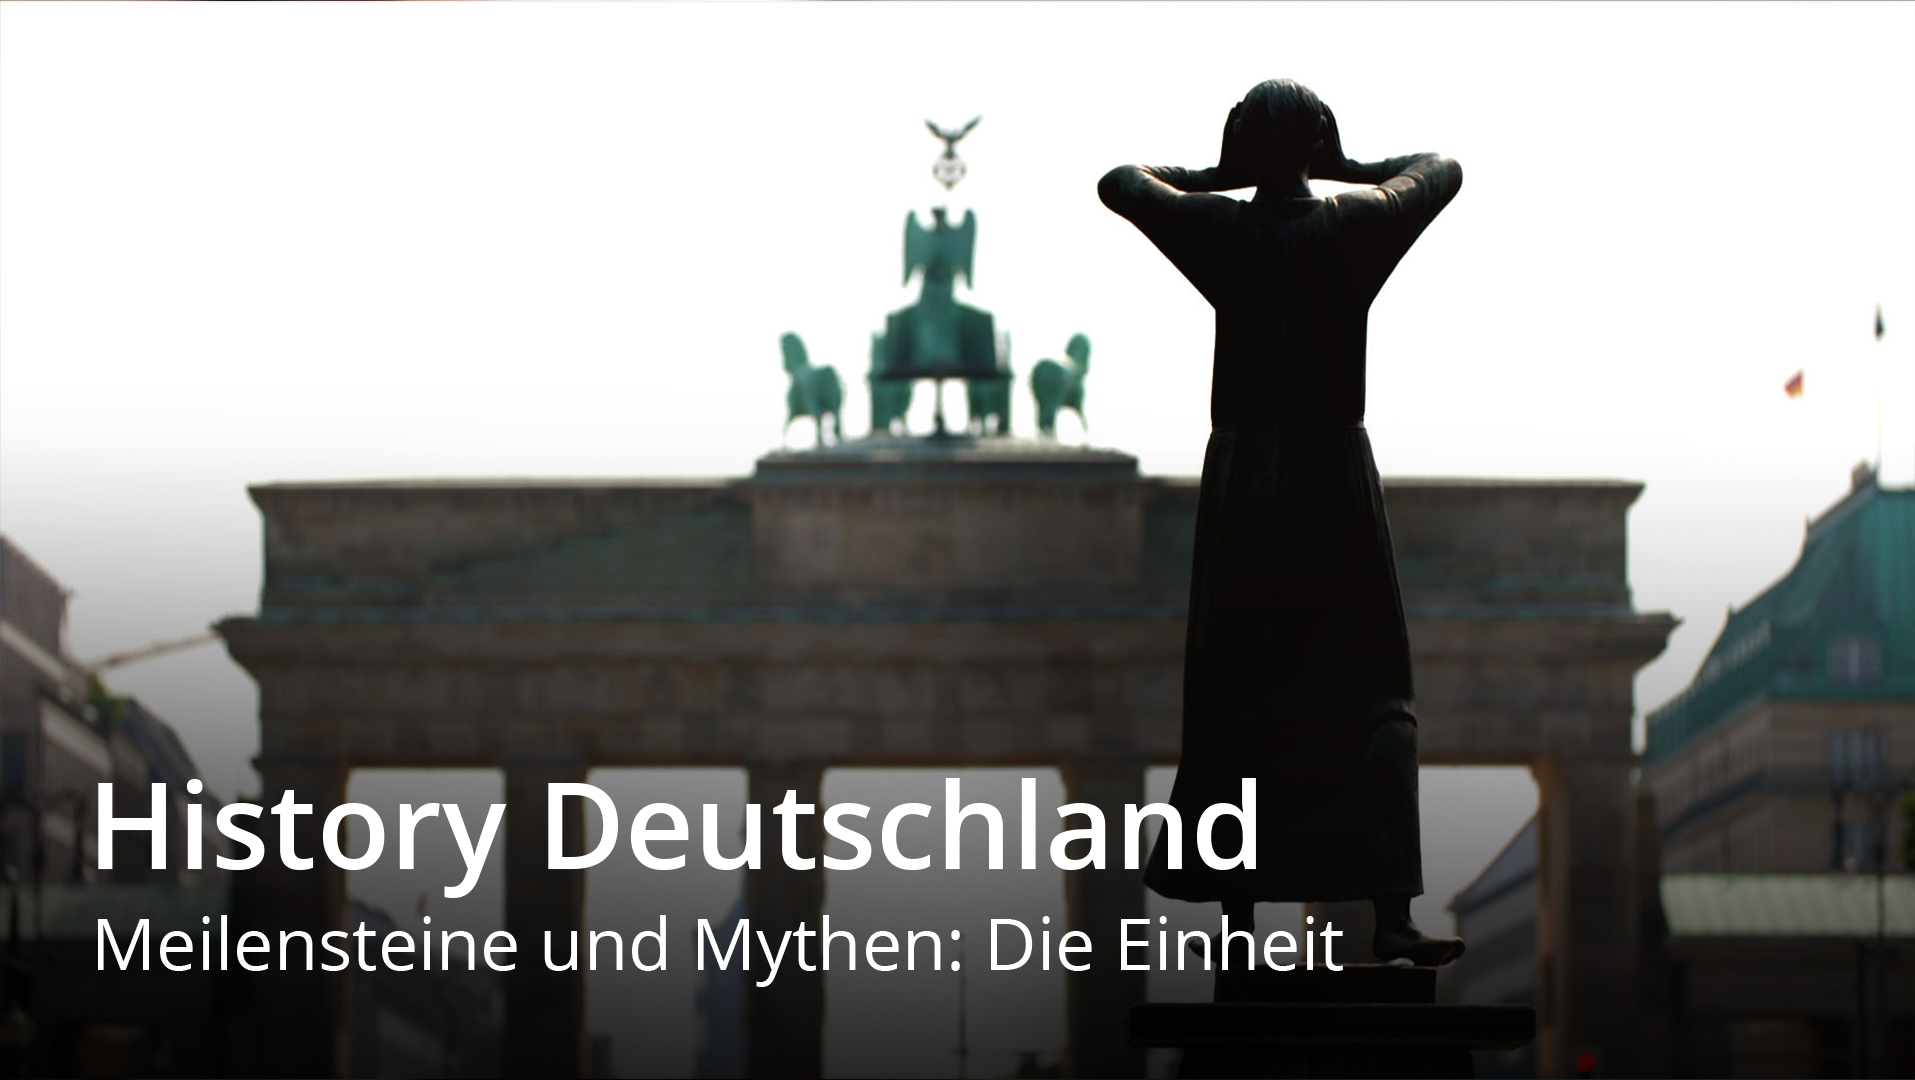 Milestones and myths: The German reunification